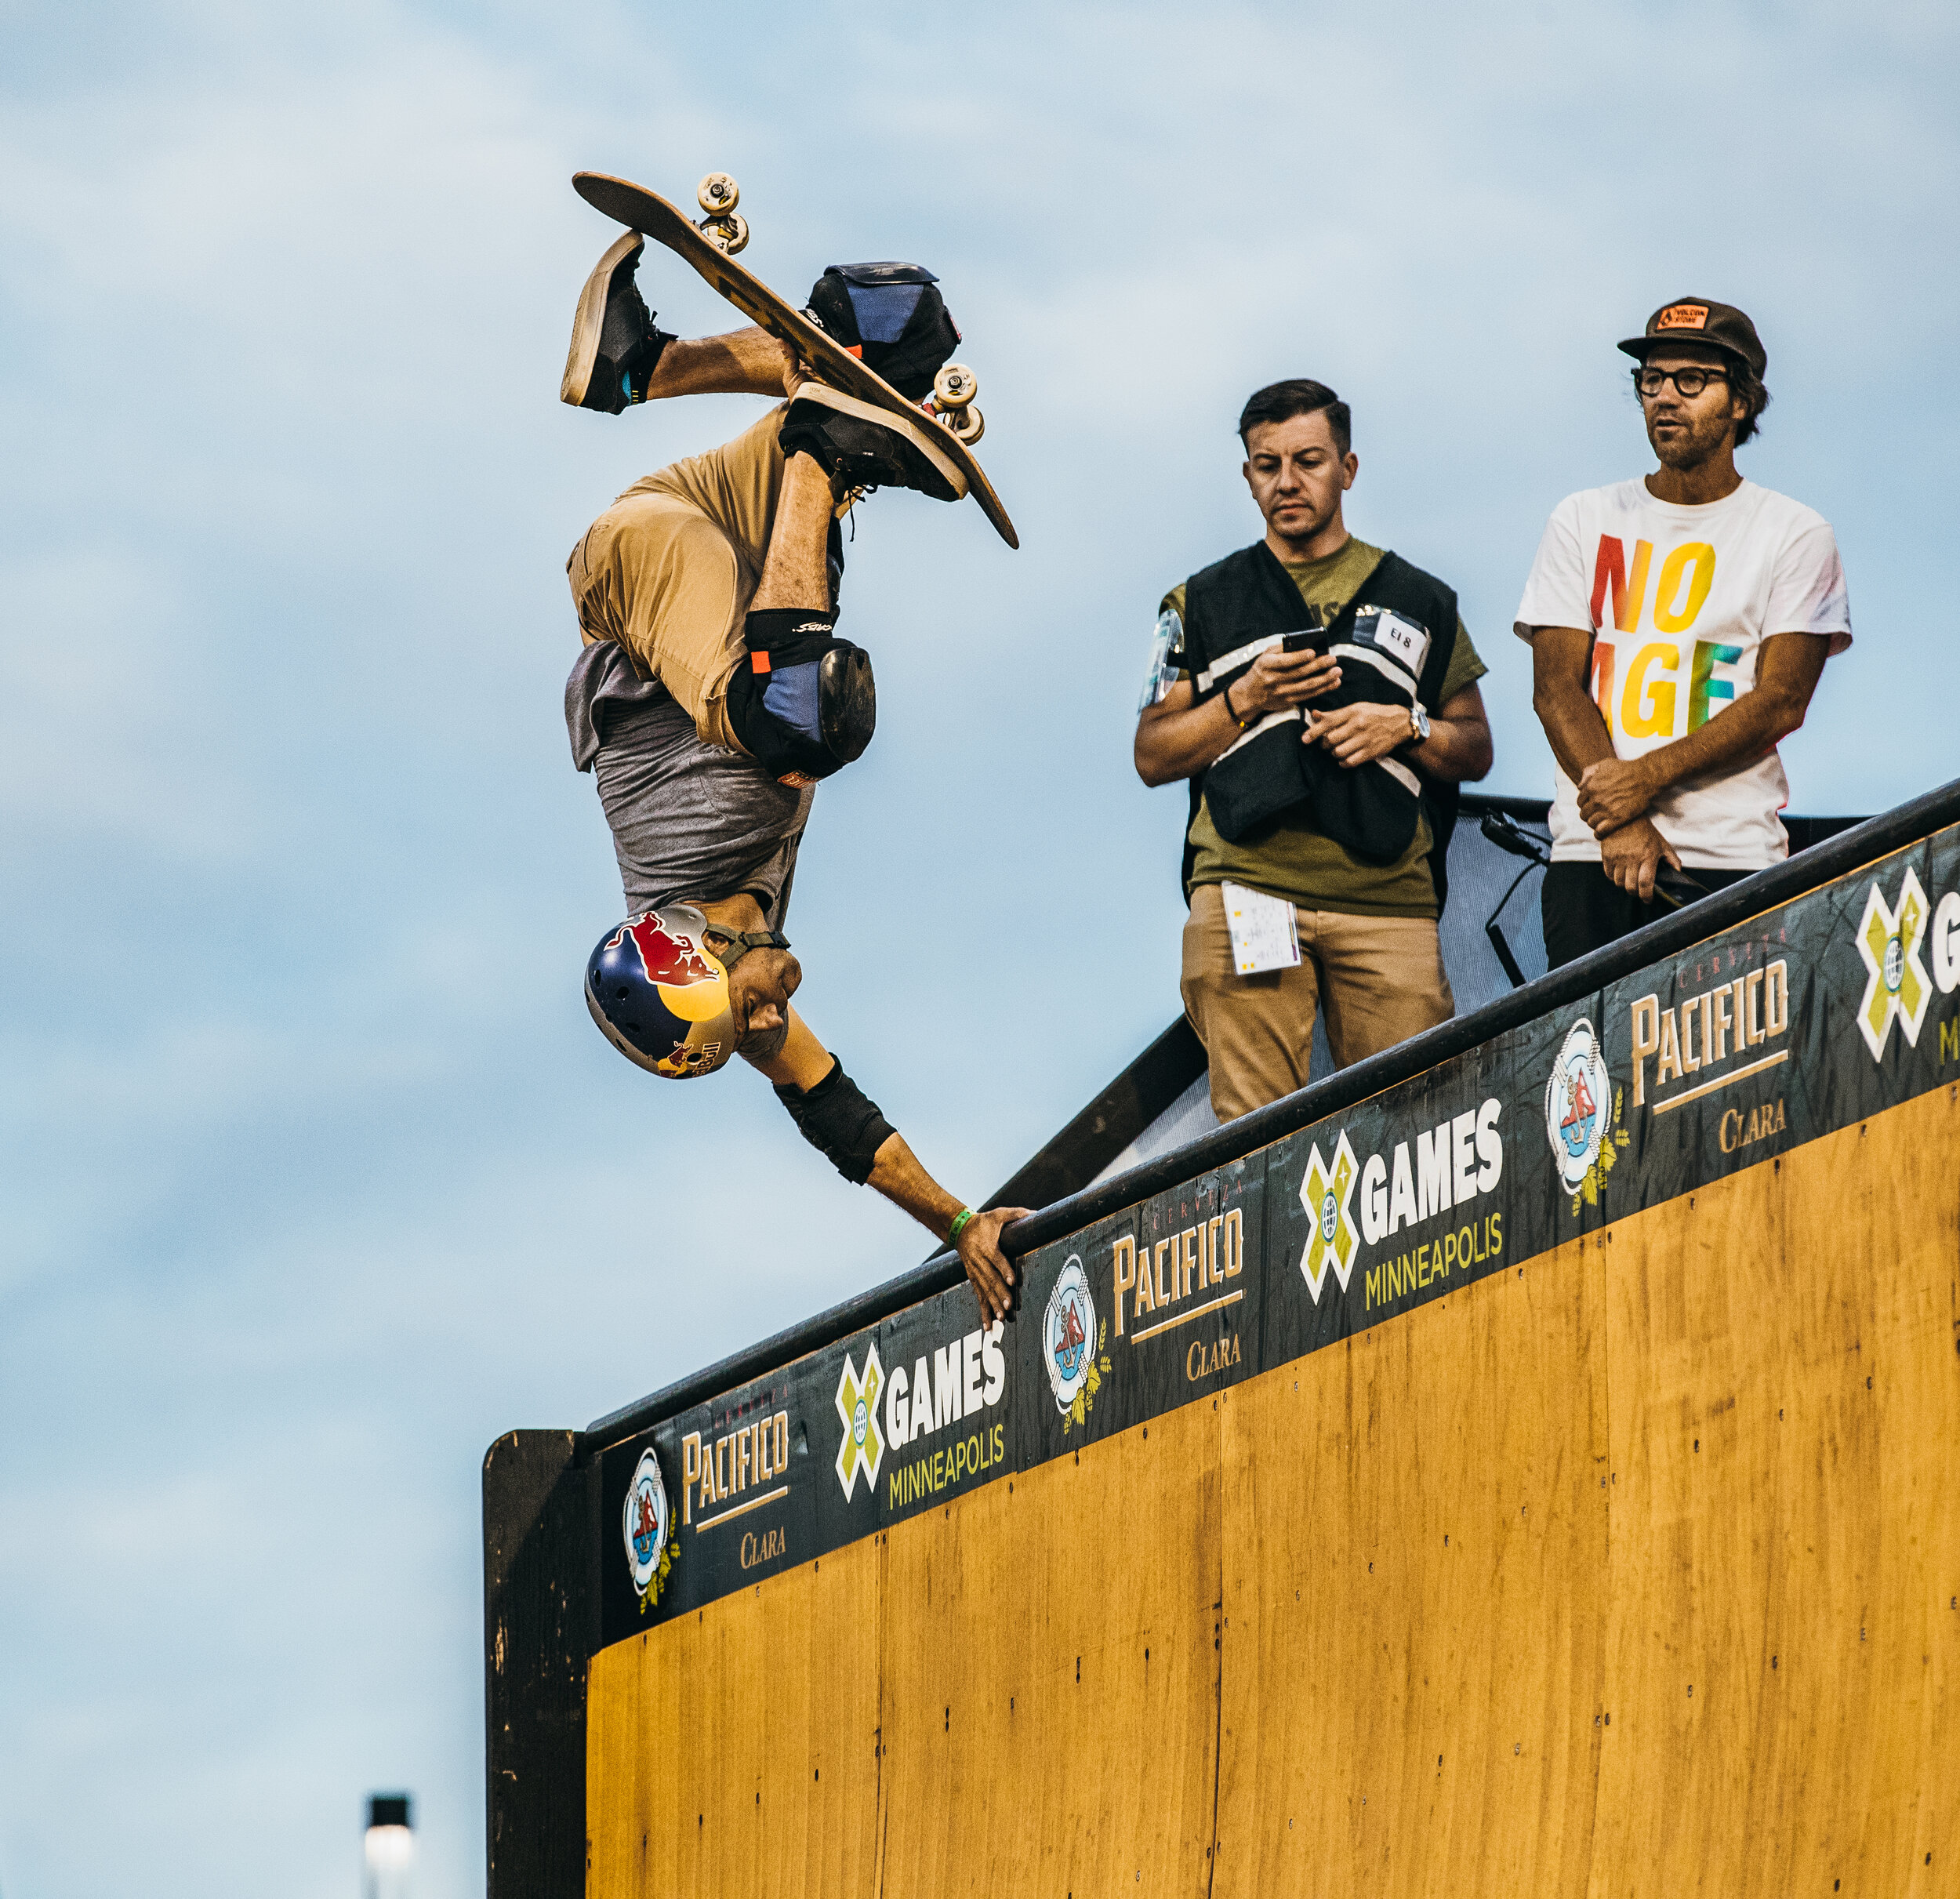 X-Games 2nd Day (41 of 48).JPG